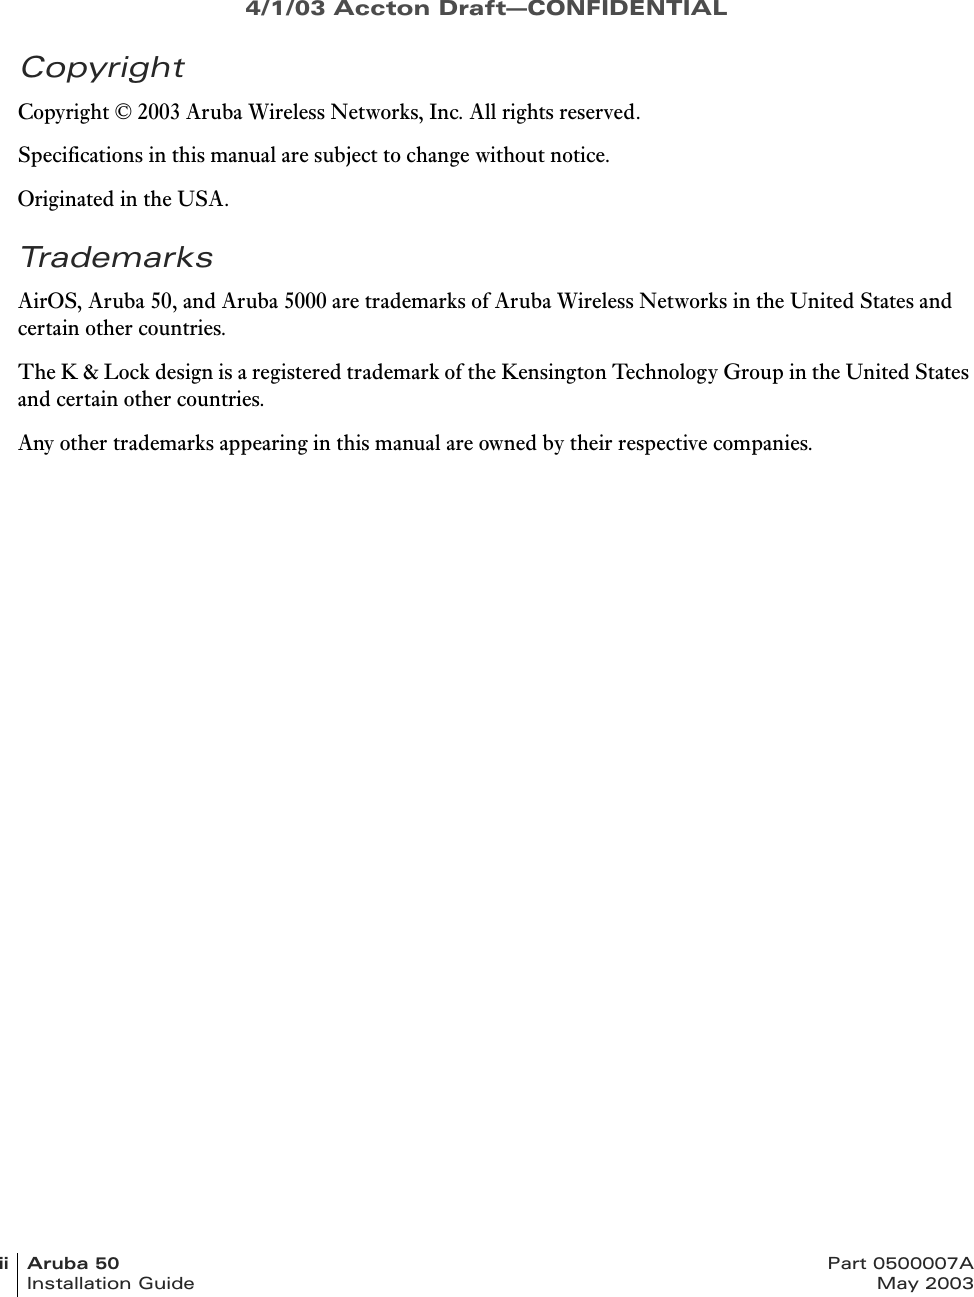 4/1/03 Accton Draft—CONFIDENTIALii Aruba 50 Part 0500007AInstallation Guide May 2003CopyrightCopyright © 2003 Aruba Wireless Networks, Inc. All rights reserved.Specifications in this manual are subject to change without notice.Originated in the USA.TrademarksAirOS, Aruba 50, and Aruba 5000 are trademarks of Aruba Wireless Networks in the United States and certain other countries.The K &amp; Lock design is a registered trademark of the Kensington Technology Group in the United States and certain other countries.Any other trademarks appearing in this manual are owned by their respective companies.